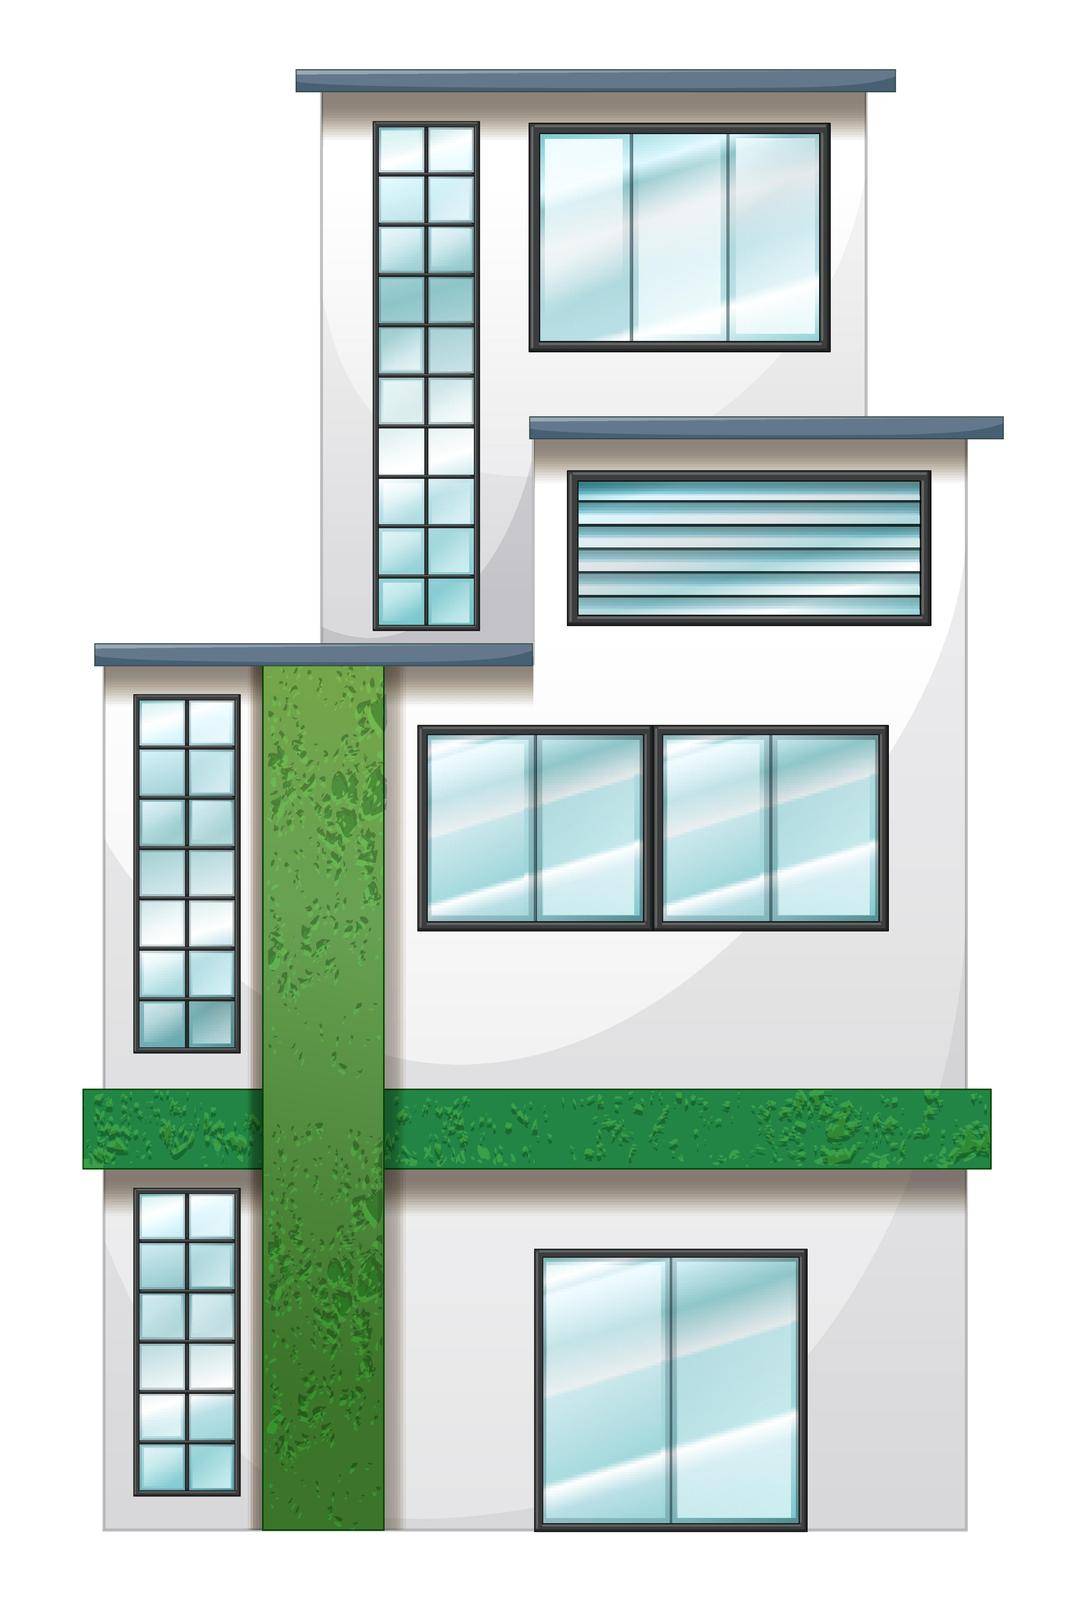 Illustration of a tall establishment on a white background